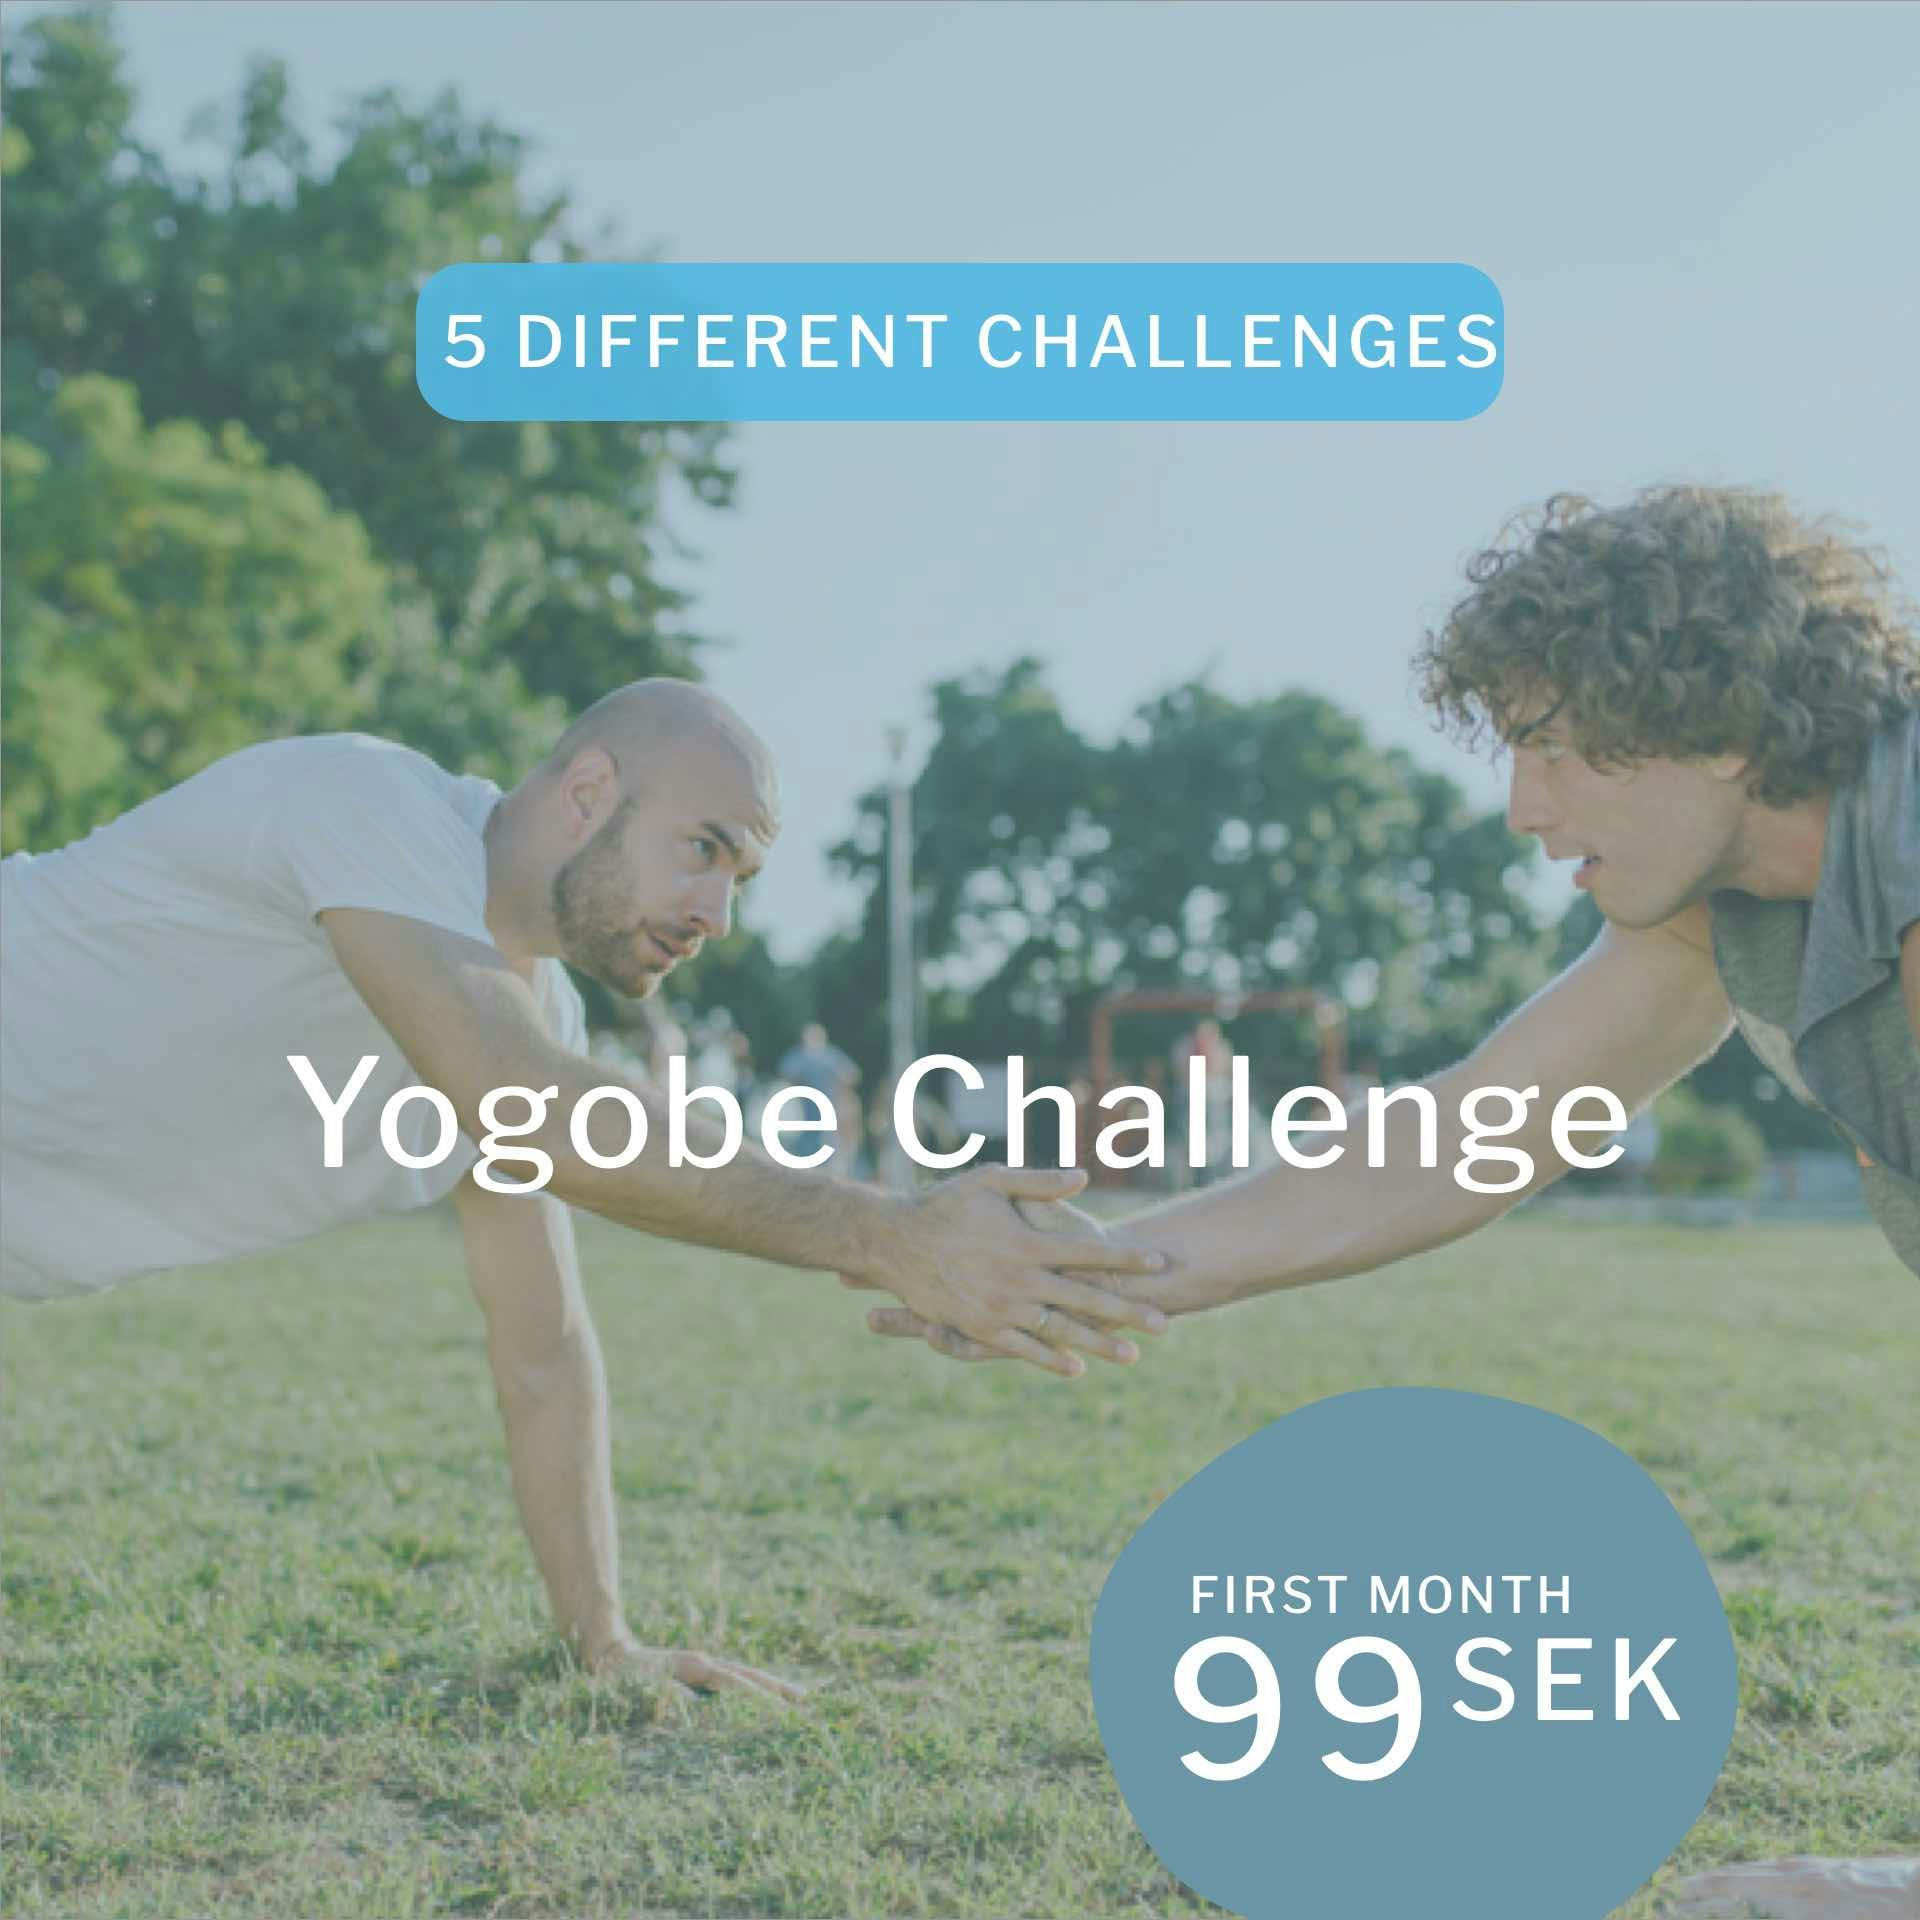 Join Yogobe Challenge and pick one of our five health challenges today!